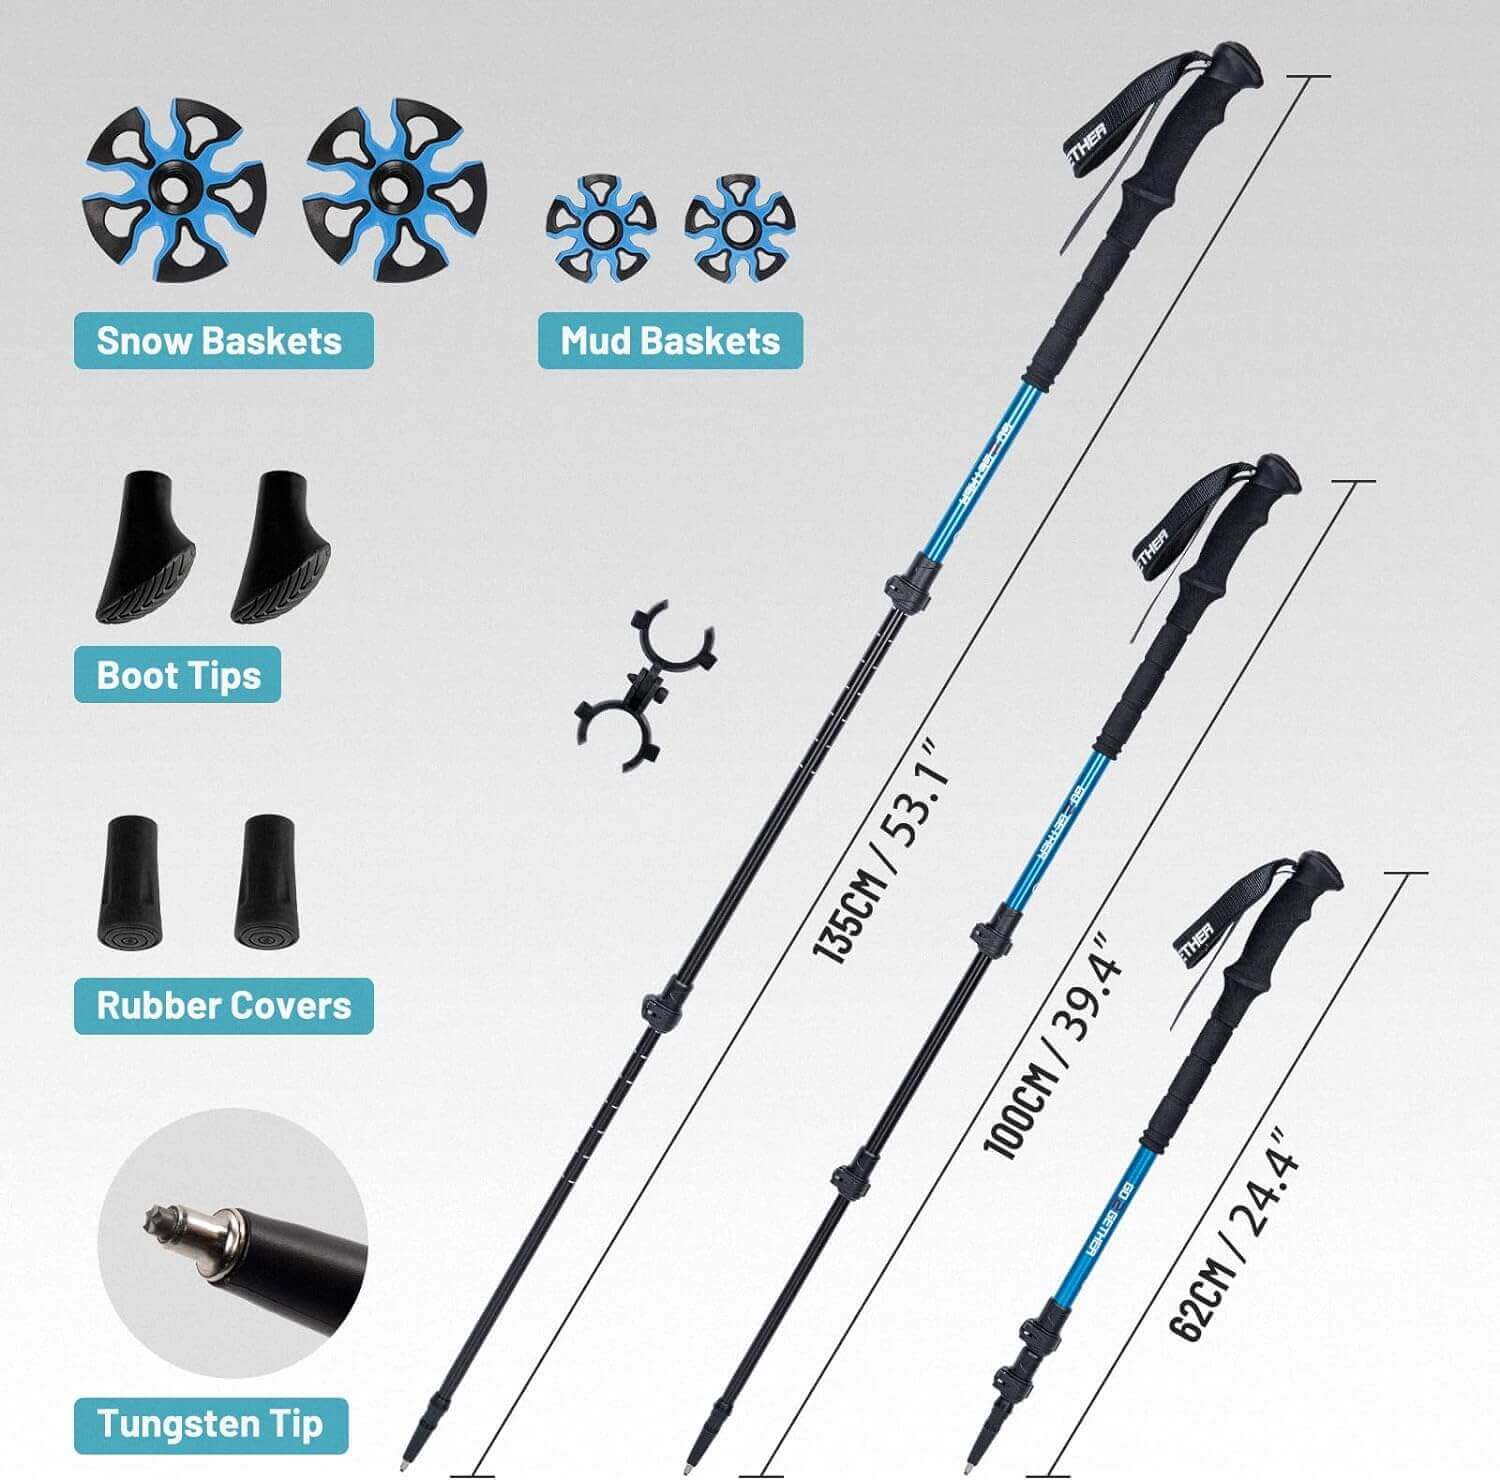 Shop The Latest >G2 Mountain Terrain Snowshoes with Trekking Poles Set > *Only $118.99*> From The Top Brand > *G2 GO2GETHERl* > Shop Now and Get Free Shipping On Orders Over $45.00 >*Shop Earth Foot*